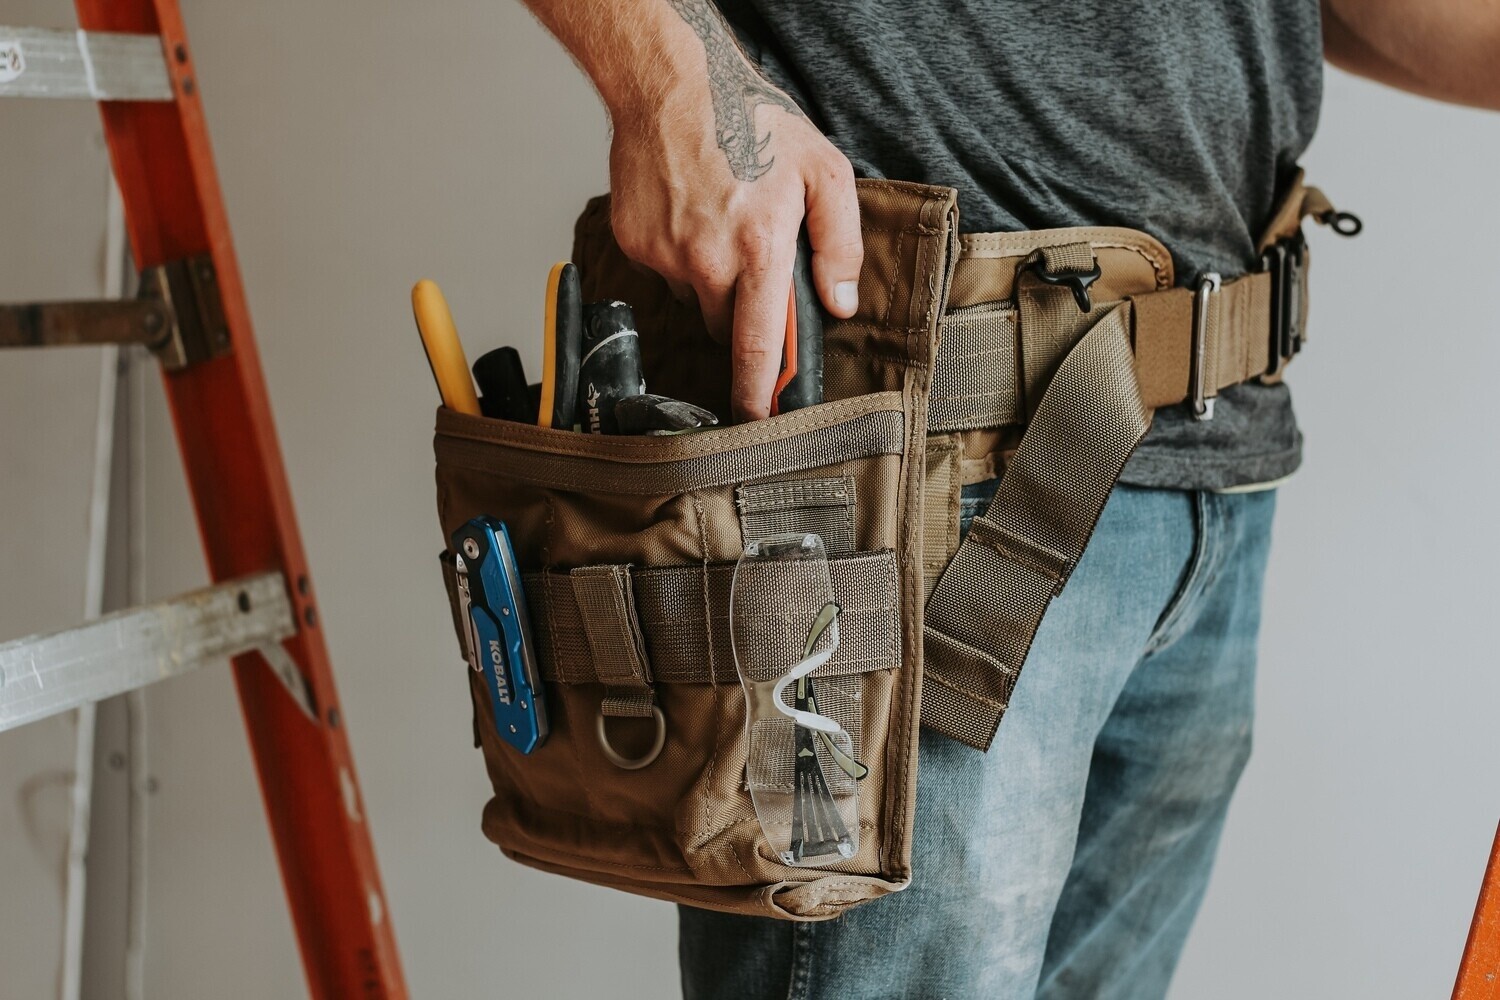 AIMS™ Main Tool Attachment Pouch V2 PLUS™, Color: Coyote, Attachment Style: AIMS™